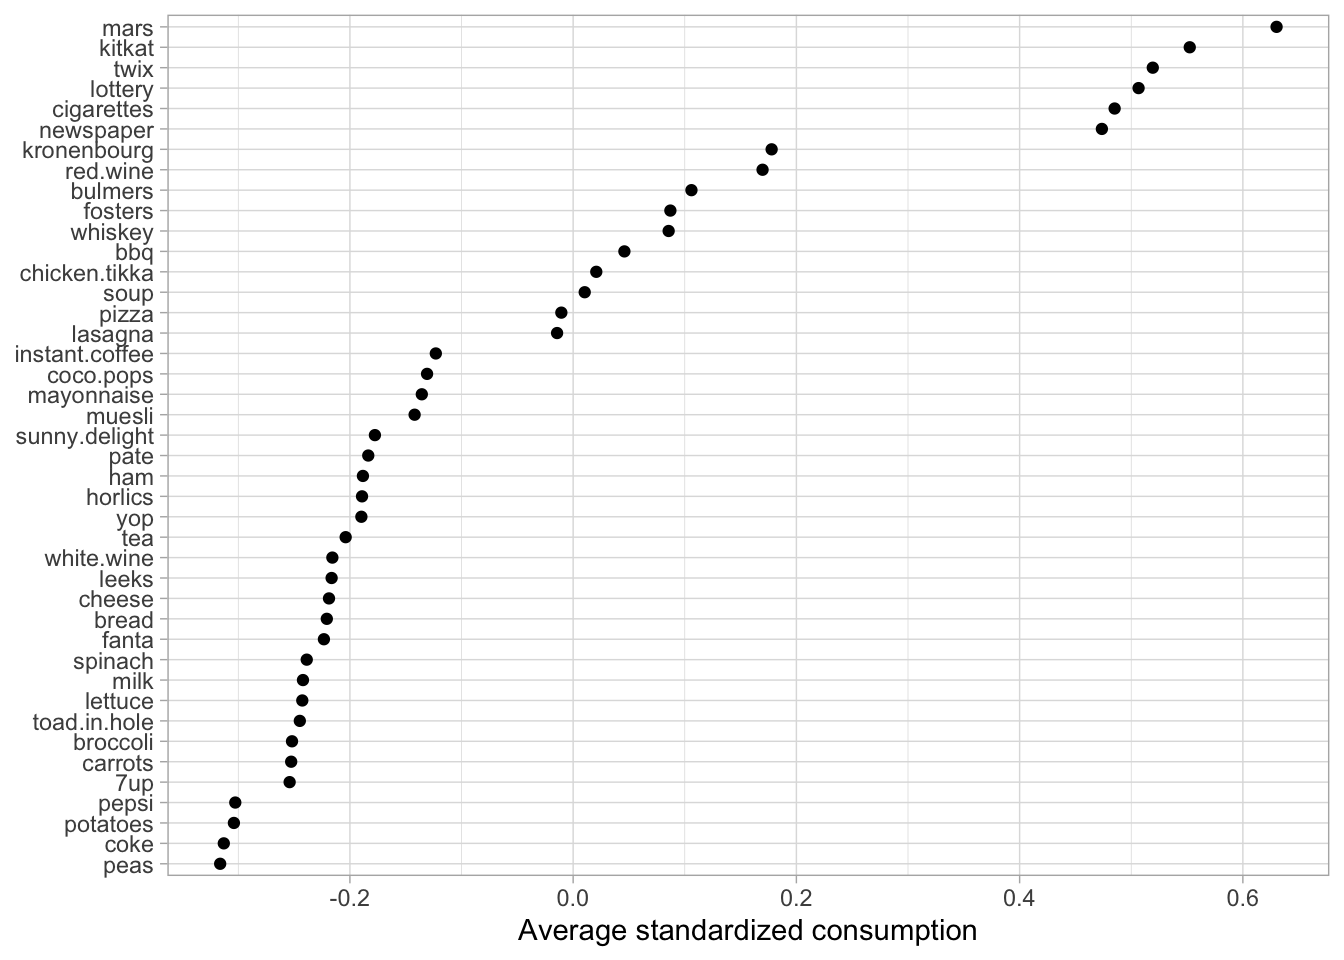 Average standardized consumption for cluster 2 observations compared to all observations.